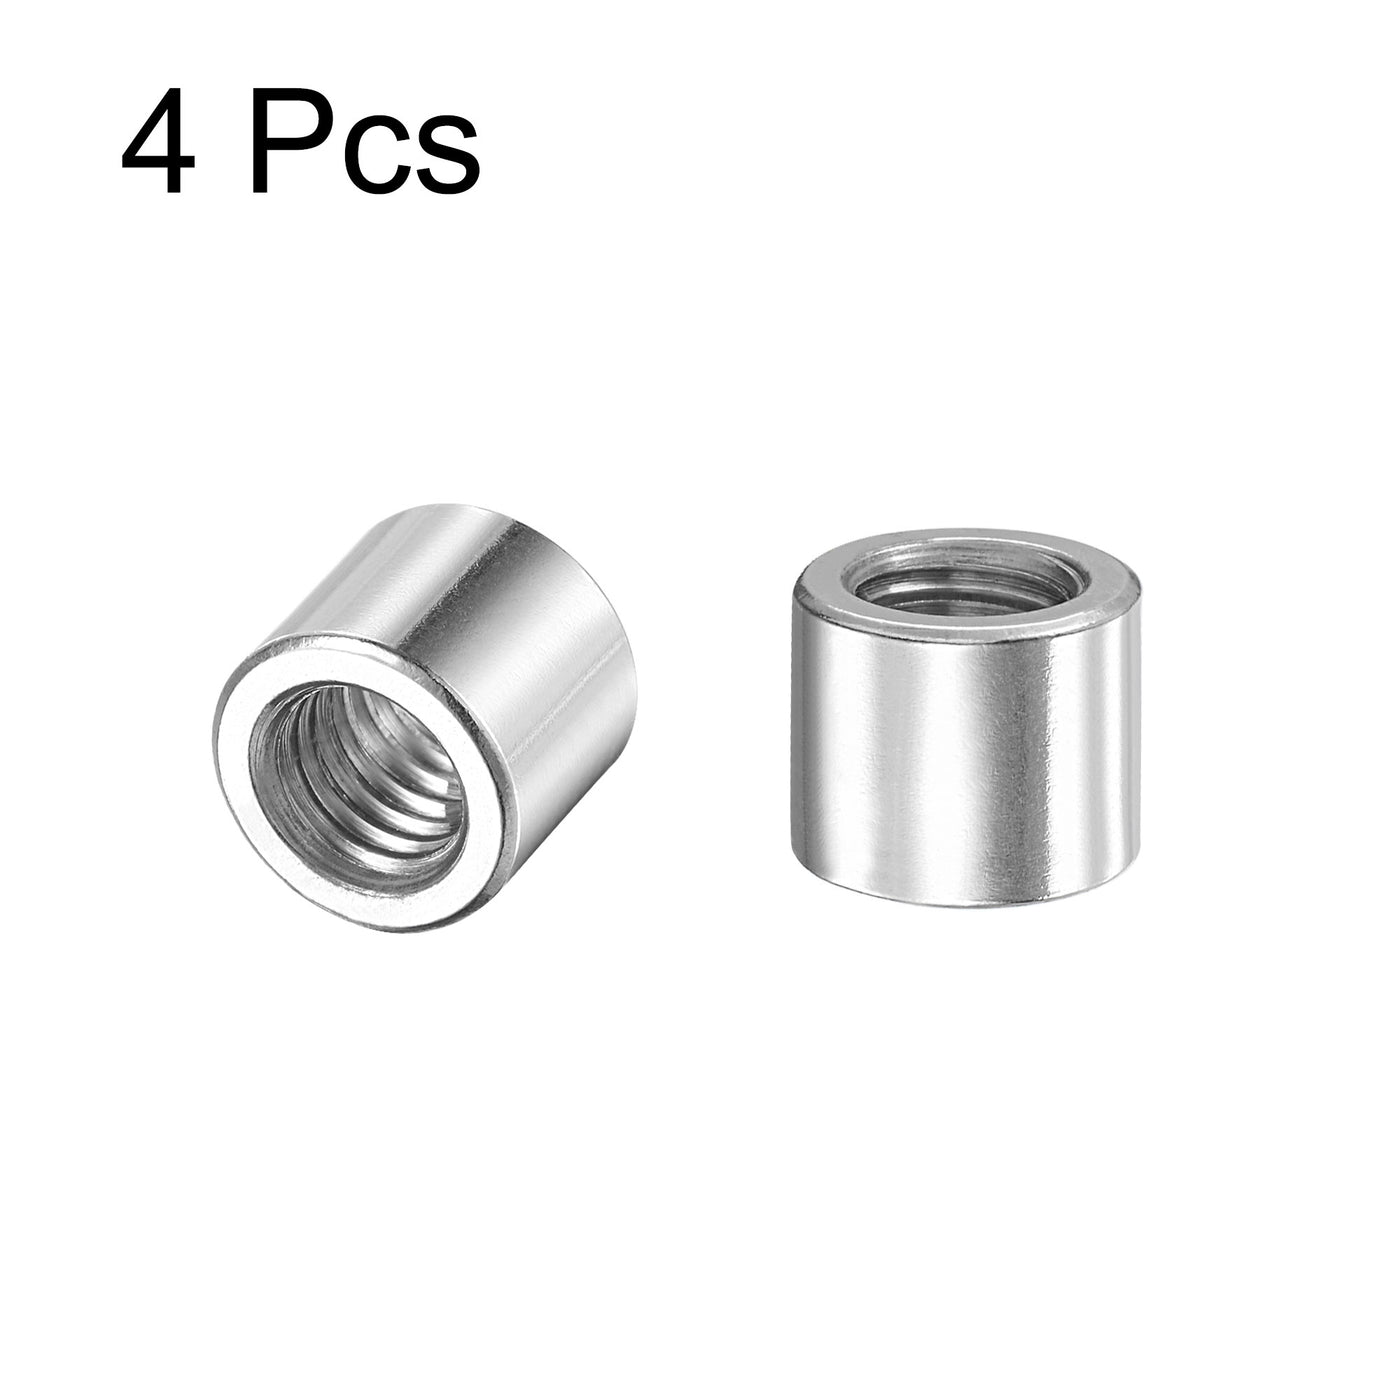 Uxcell Uxcell M10x14mmx13mm Weld On Bung Nut Threaded 201 Stainless Steel Insert Weldable 4pcs